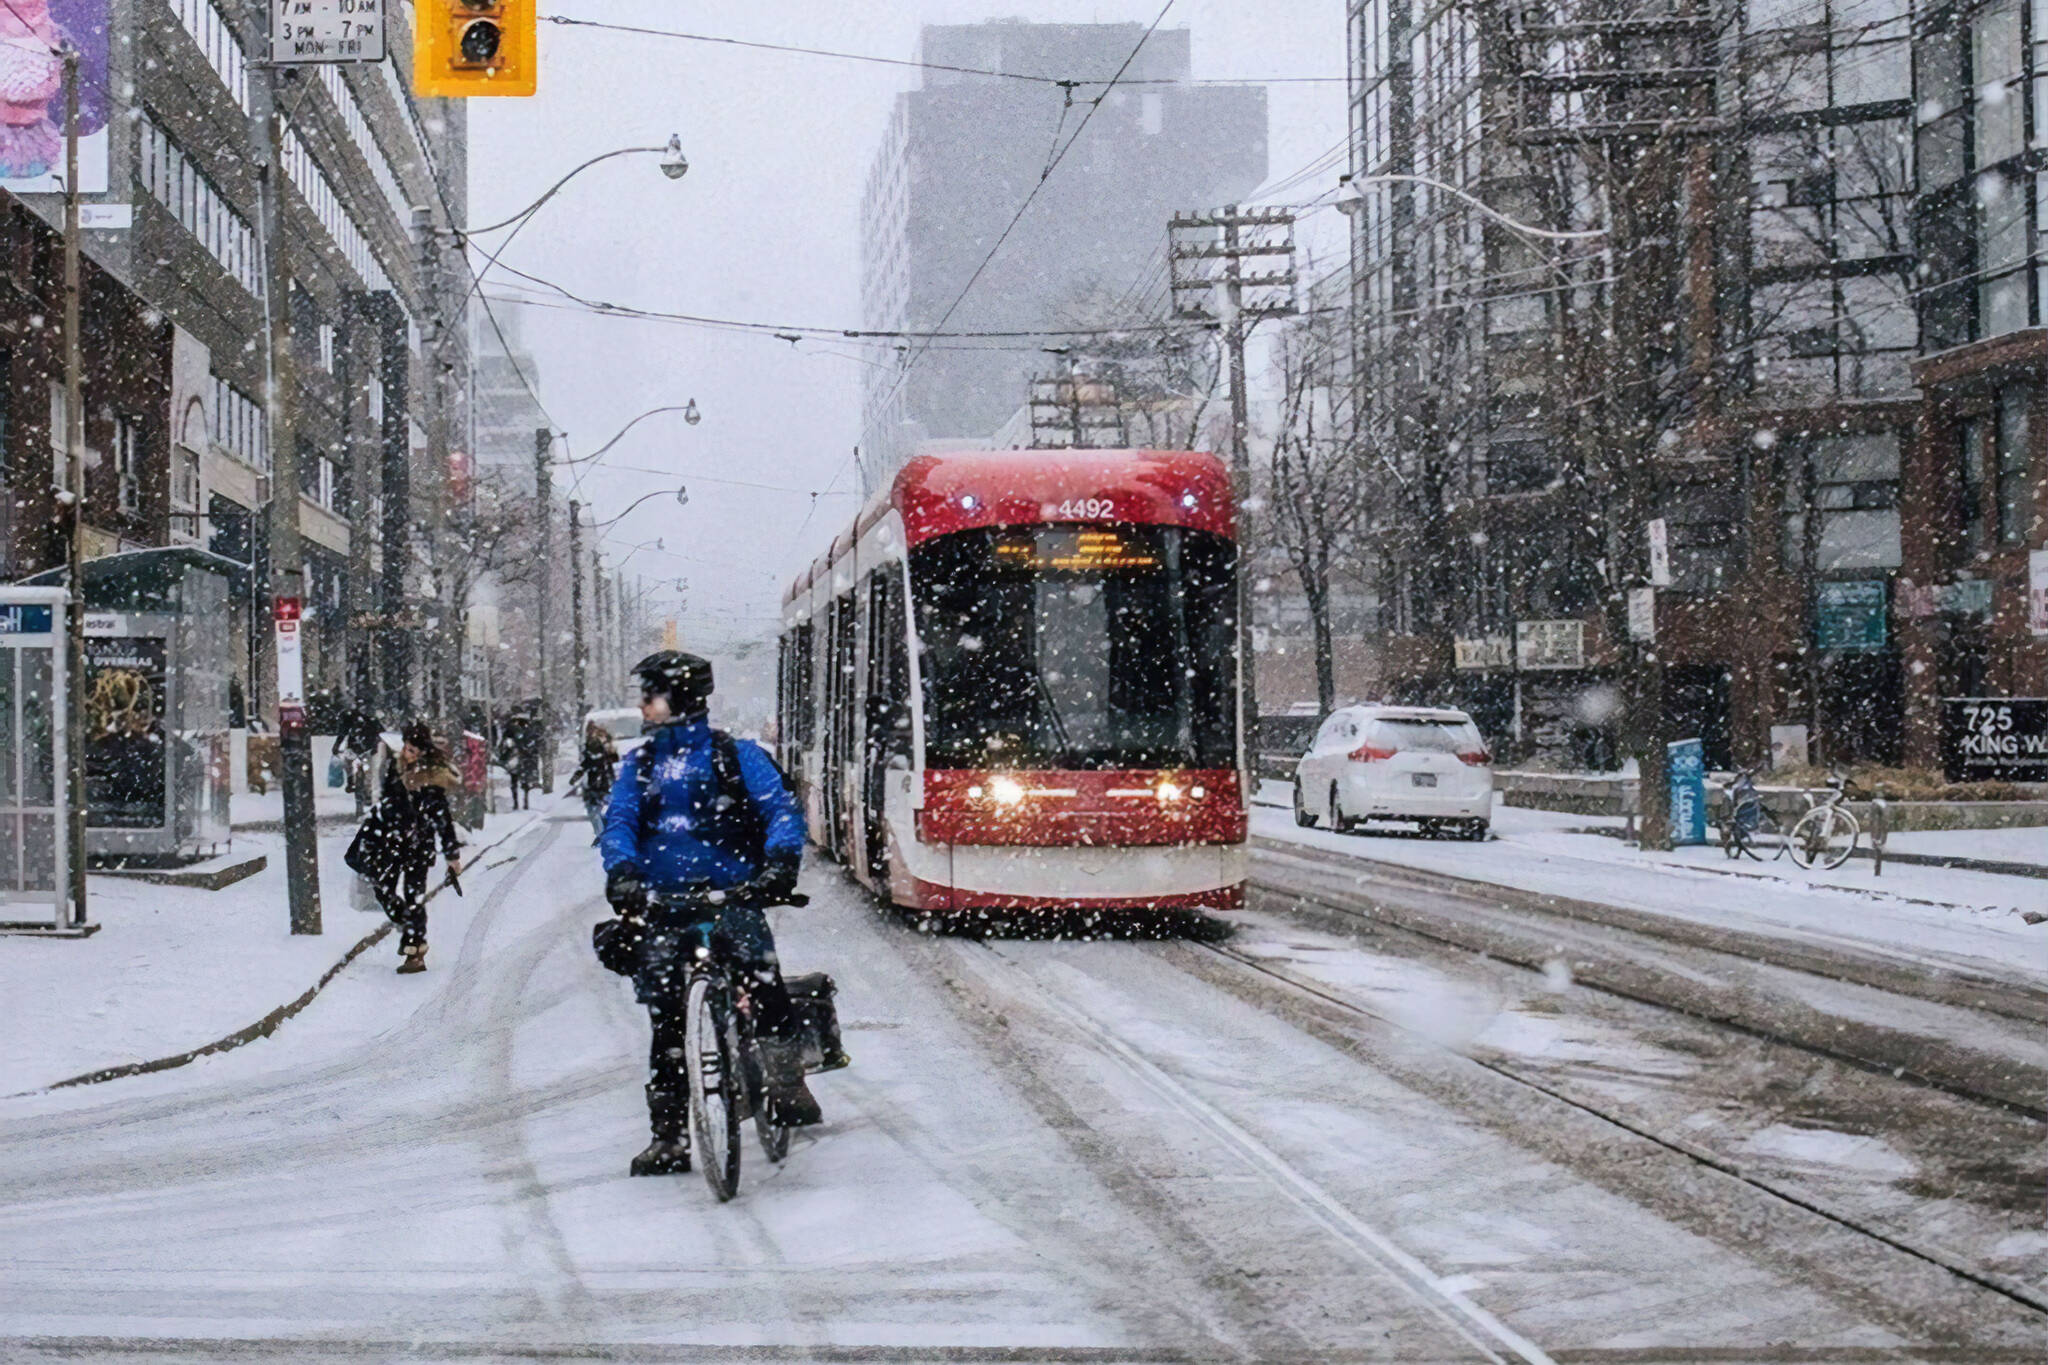 Environment Canada issues special weather statement for Toronto ahead